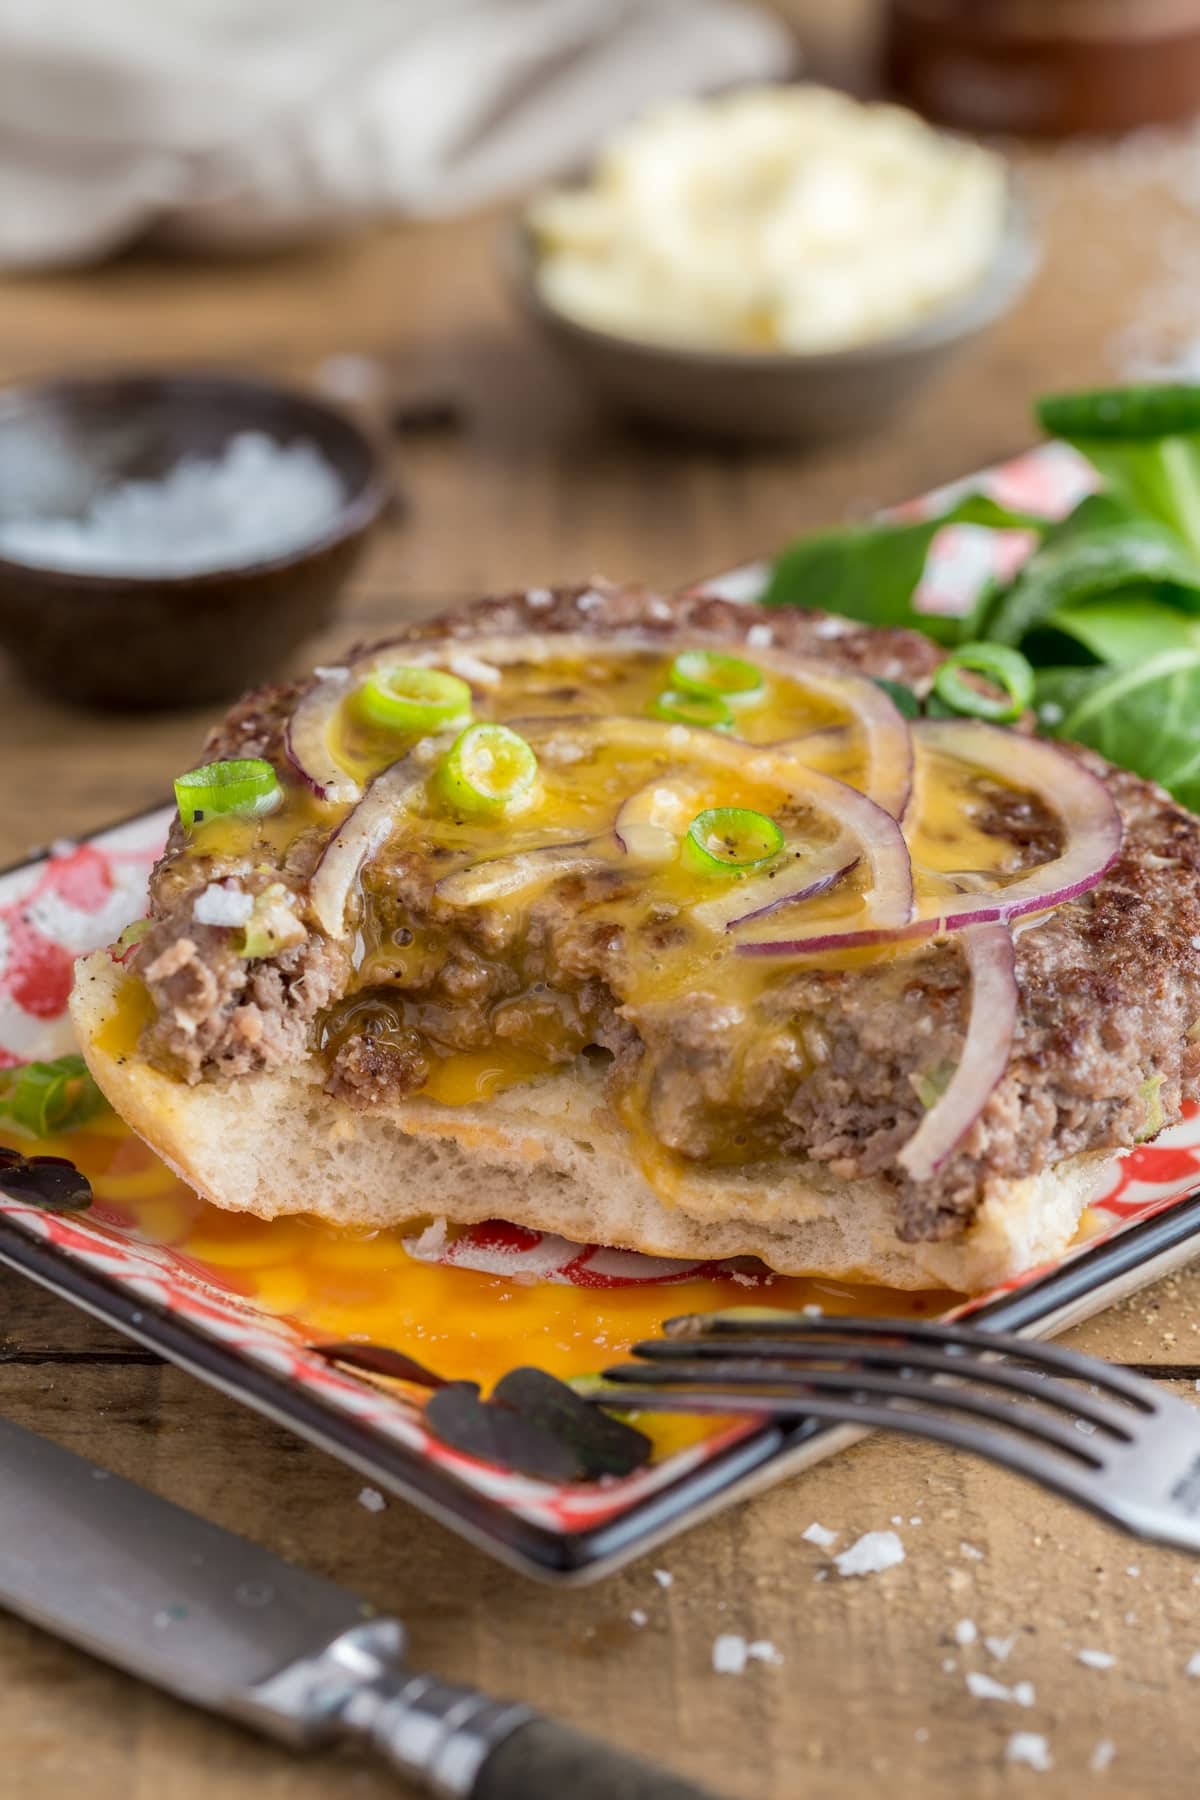 Detail of open beef patty sandwich with raw egg yolk pouring over the sides.